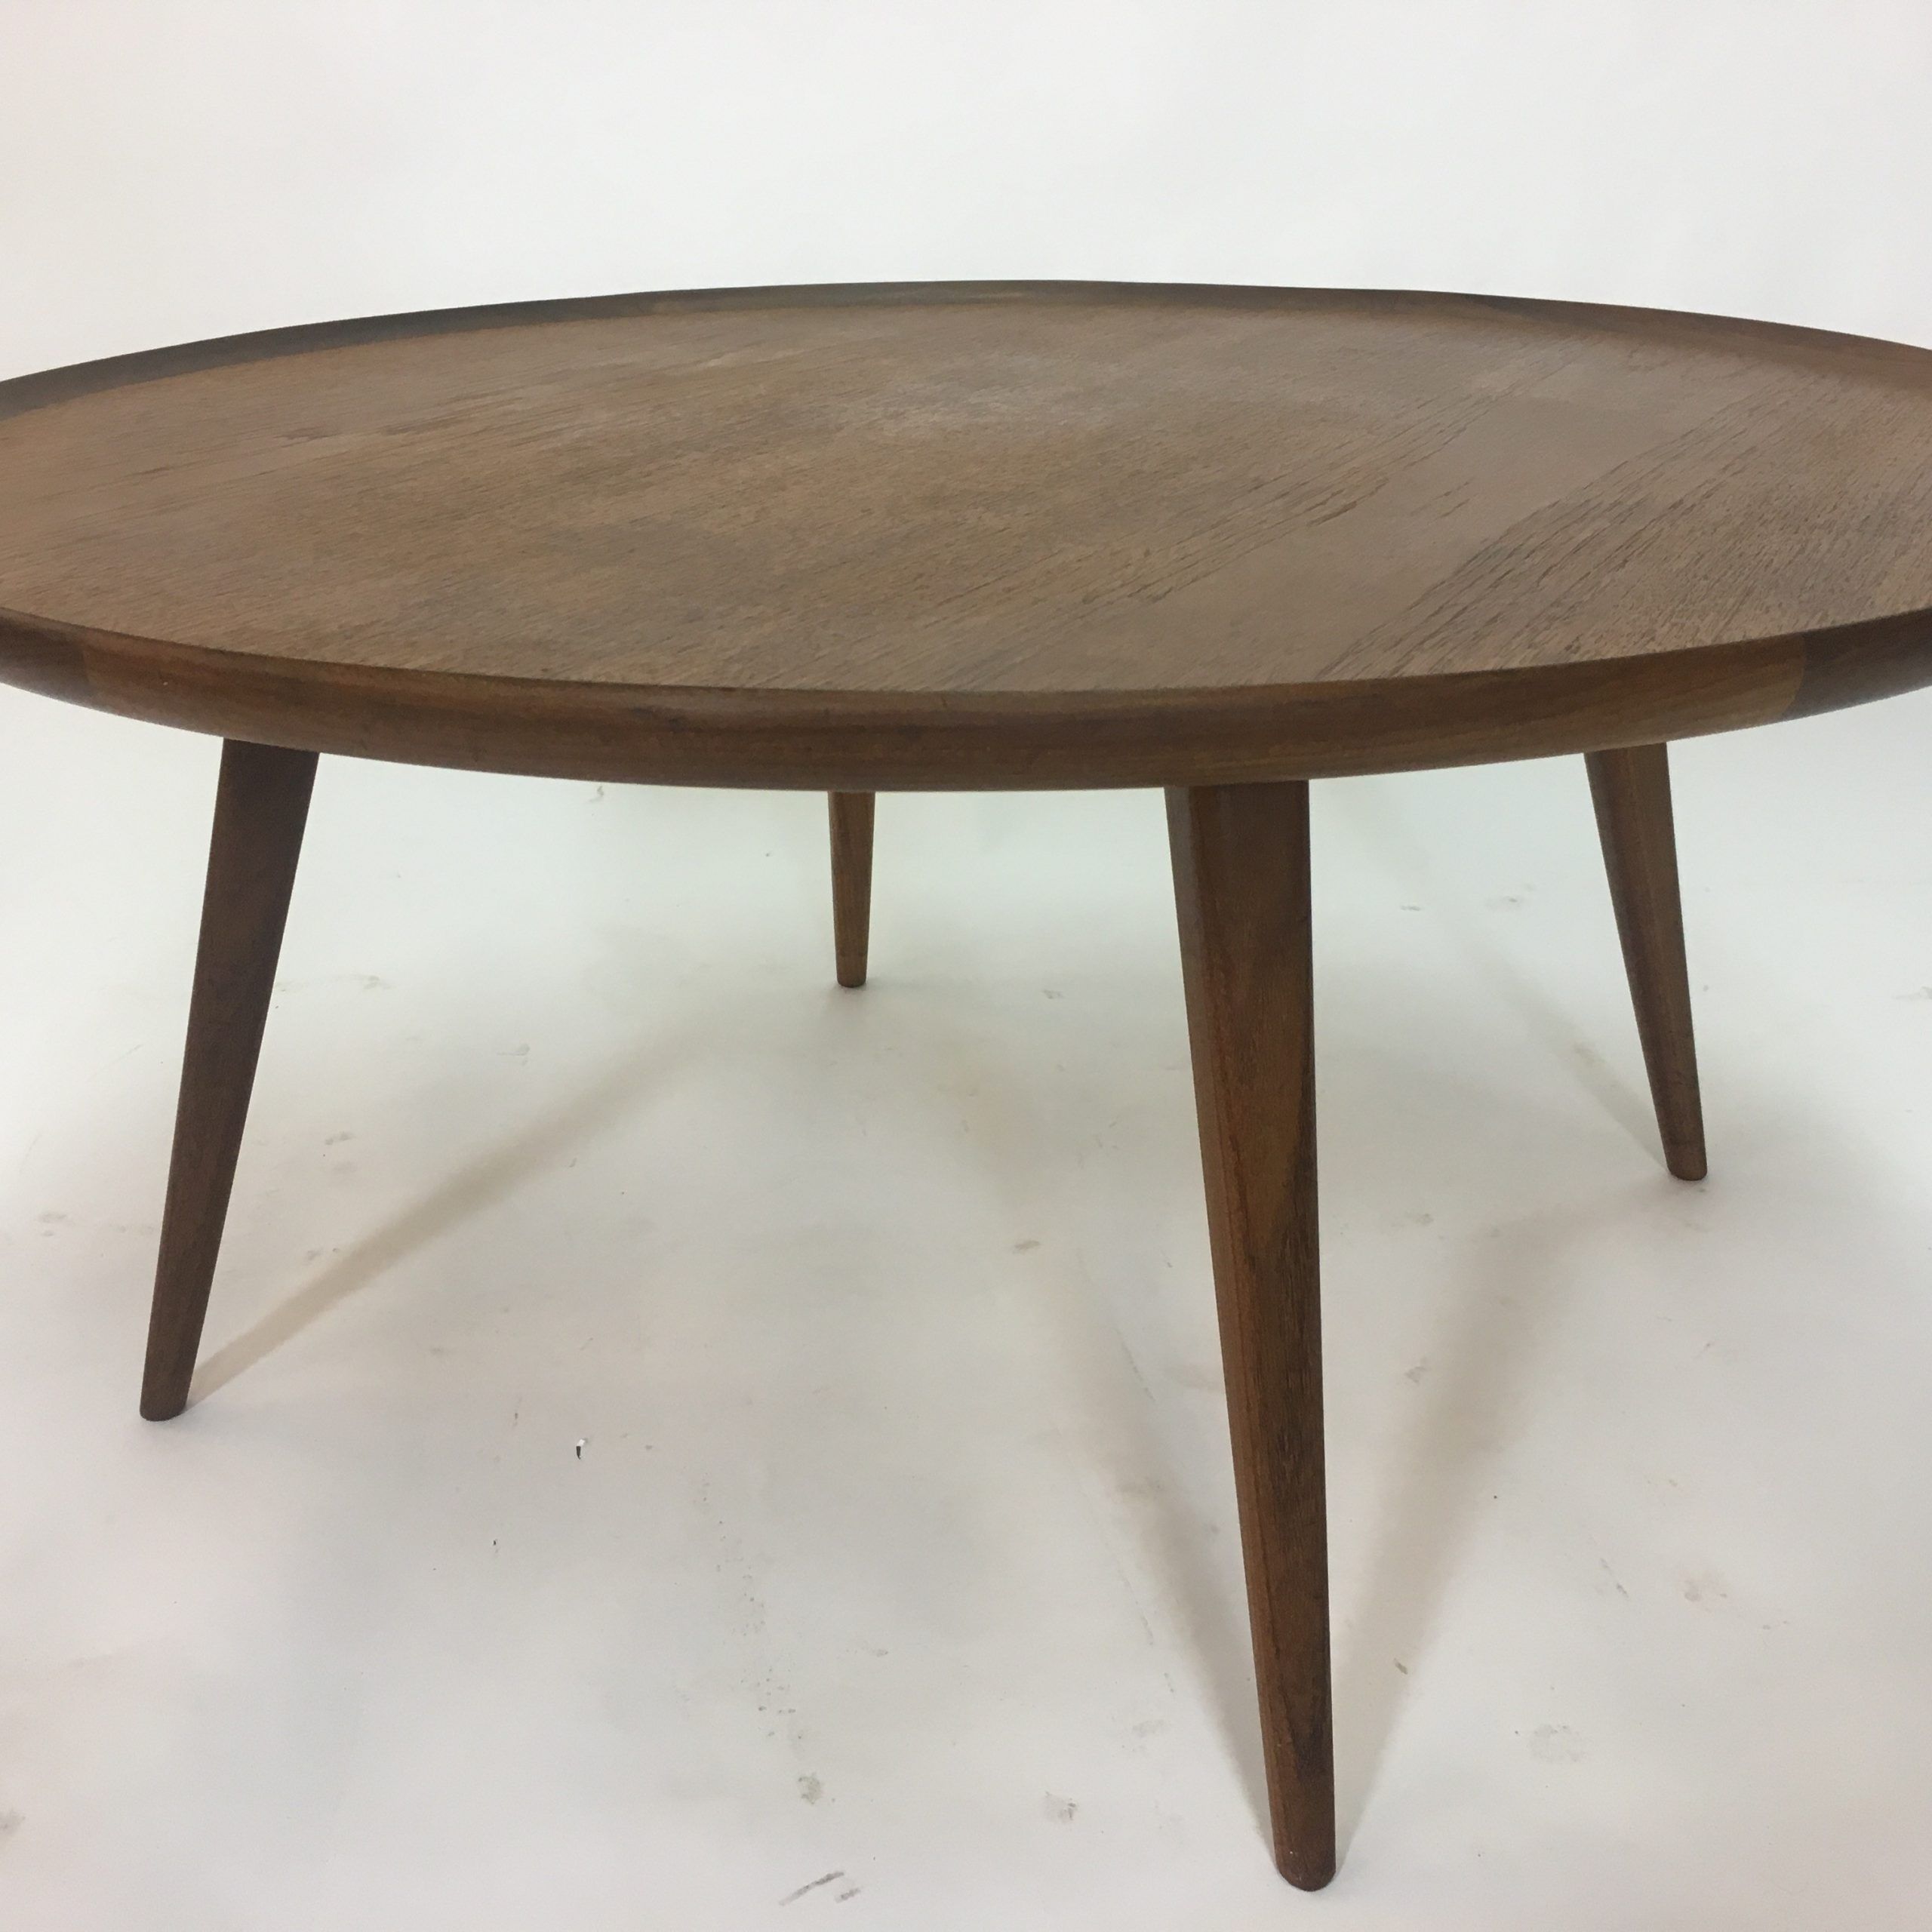 Round Coffee Tables Inside Favorite Vintage Round Teak Coffee Table – 1950s – Design Market (View 4 of 20)